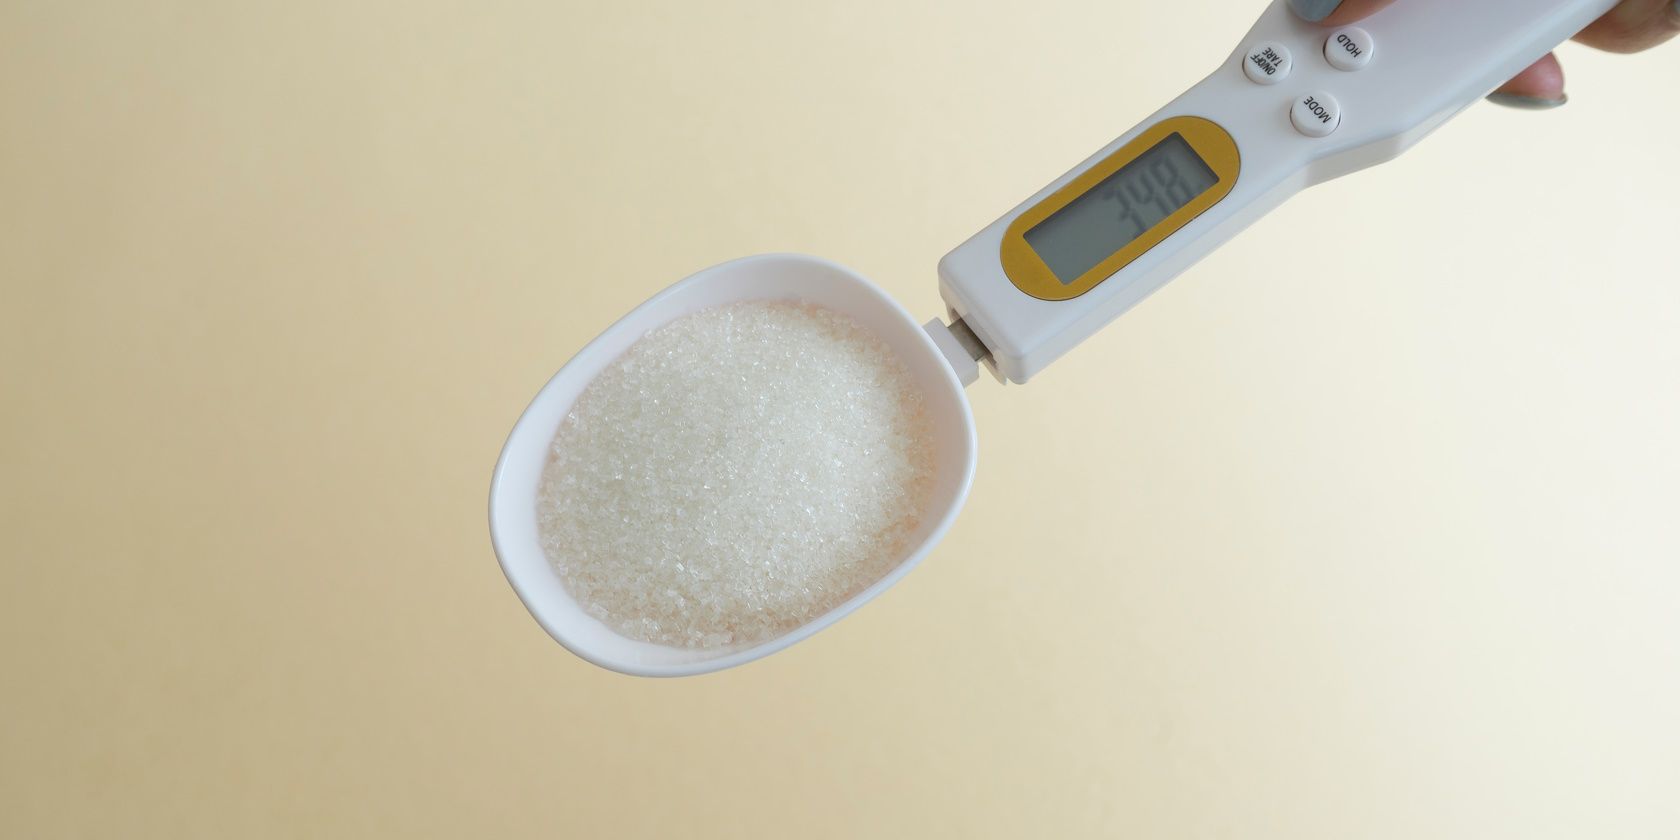 Person using a handheld spoon scale to measure sugar